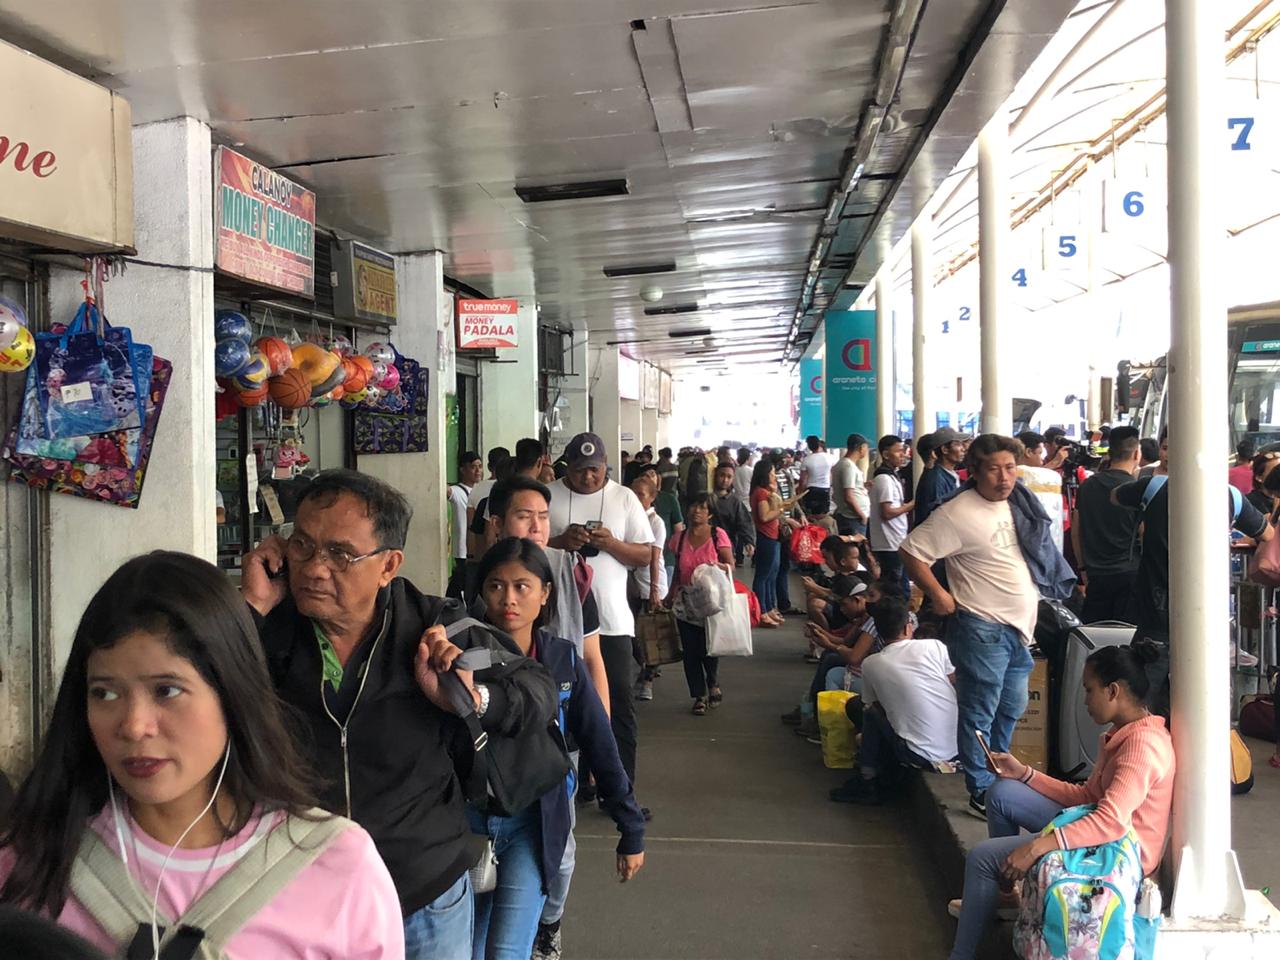 Fewer people were at the Araneta Bus Terminal on Thursday, Oct. 31, a day before Undas. All photos by Daphne Galvez/INQUIRER.net